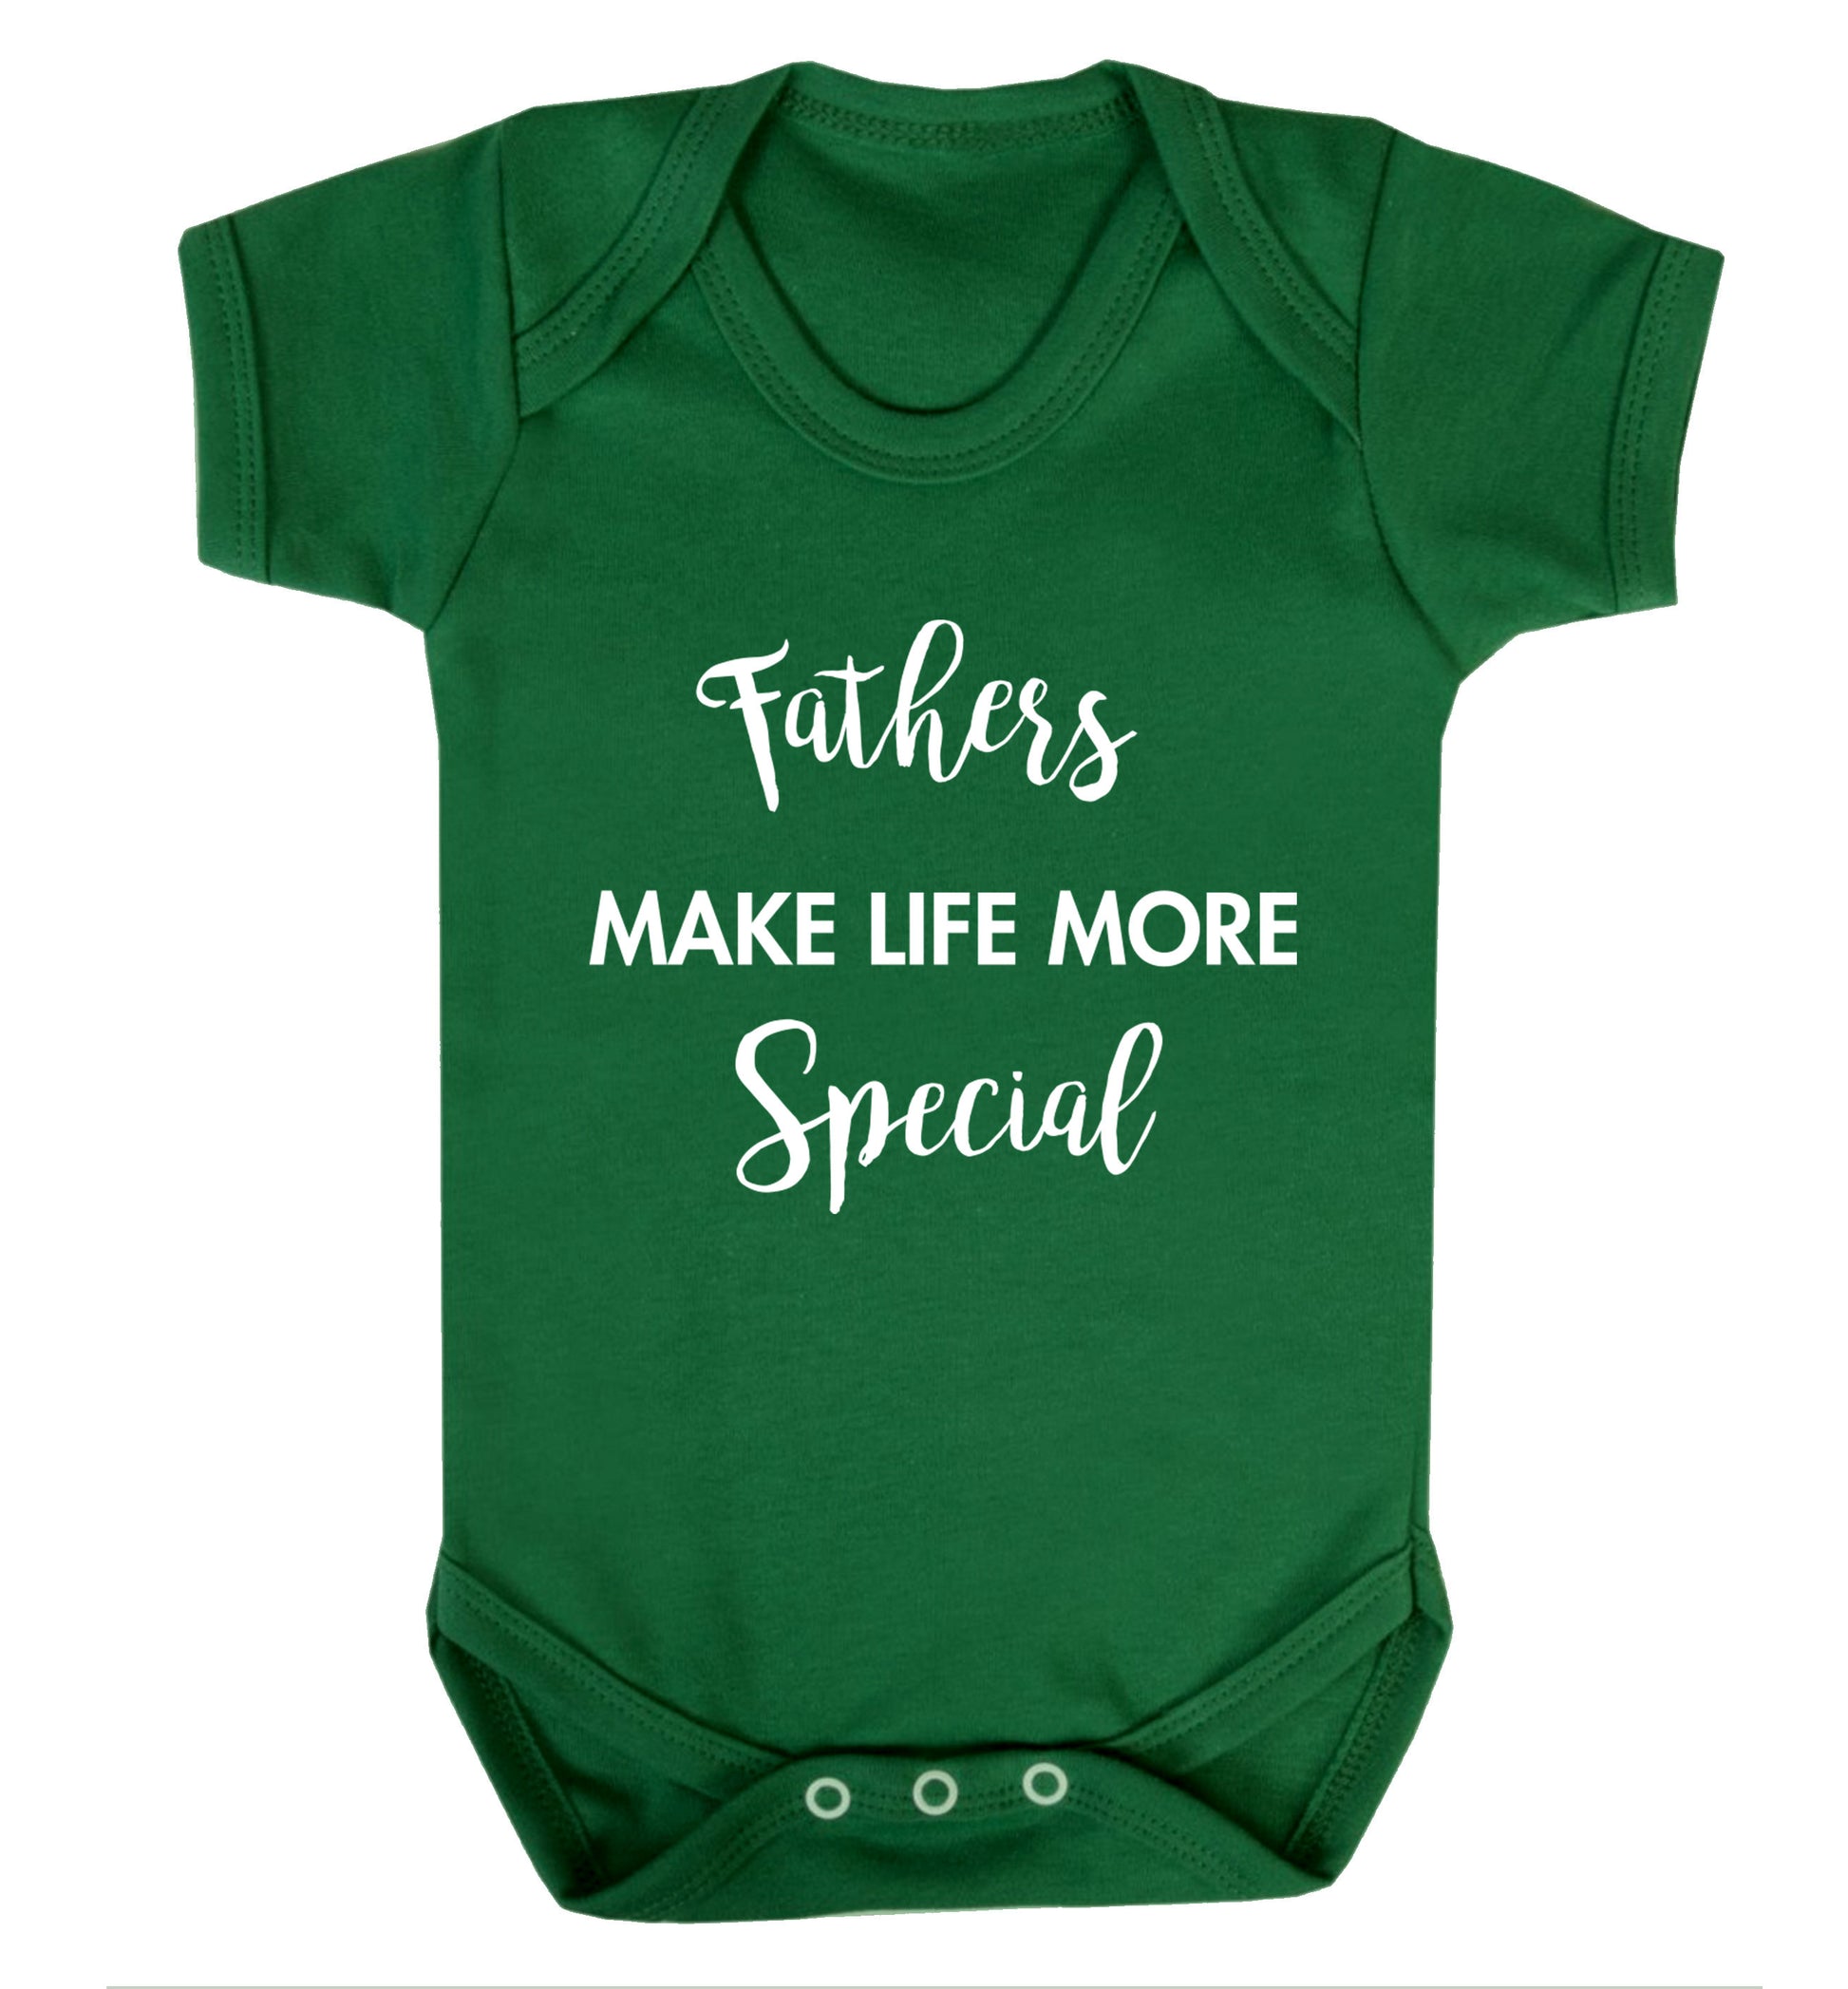 Fathers make life more special Baby Vest green 18-24 months